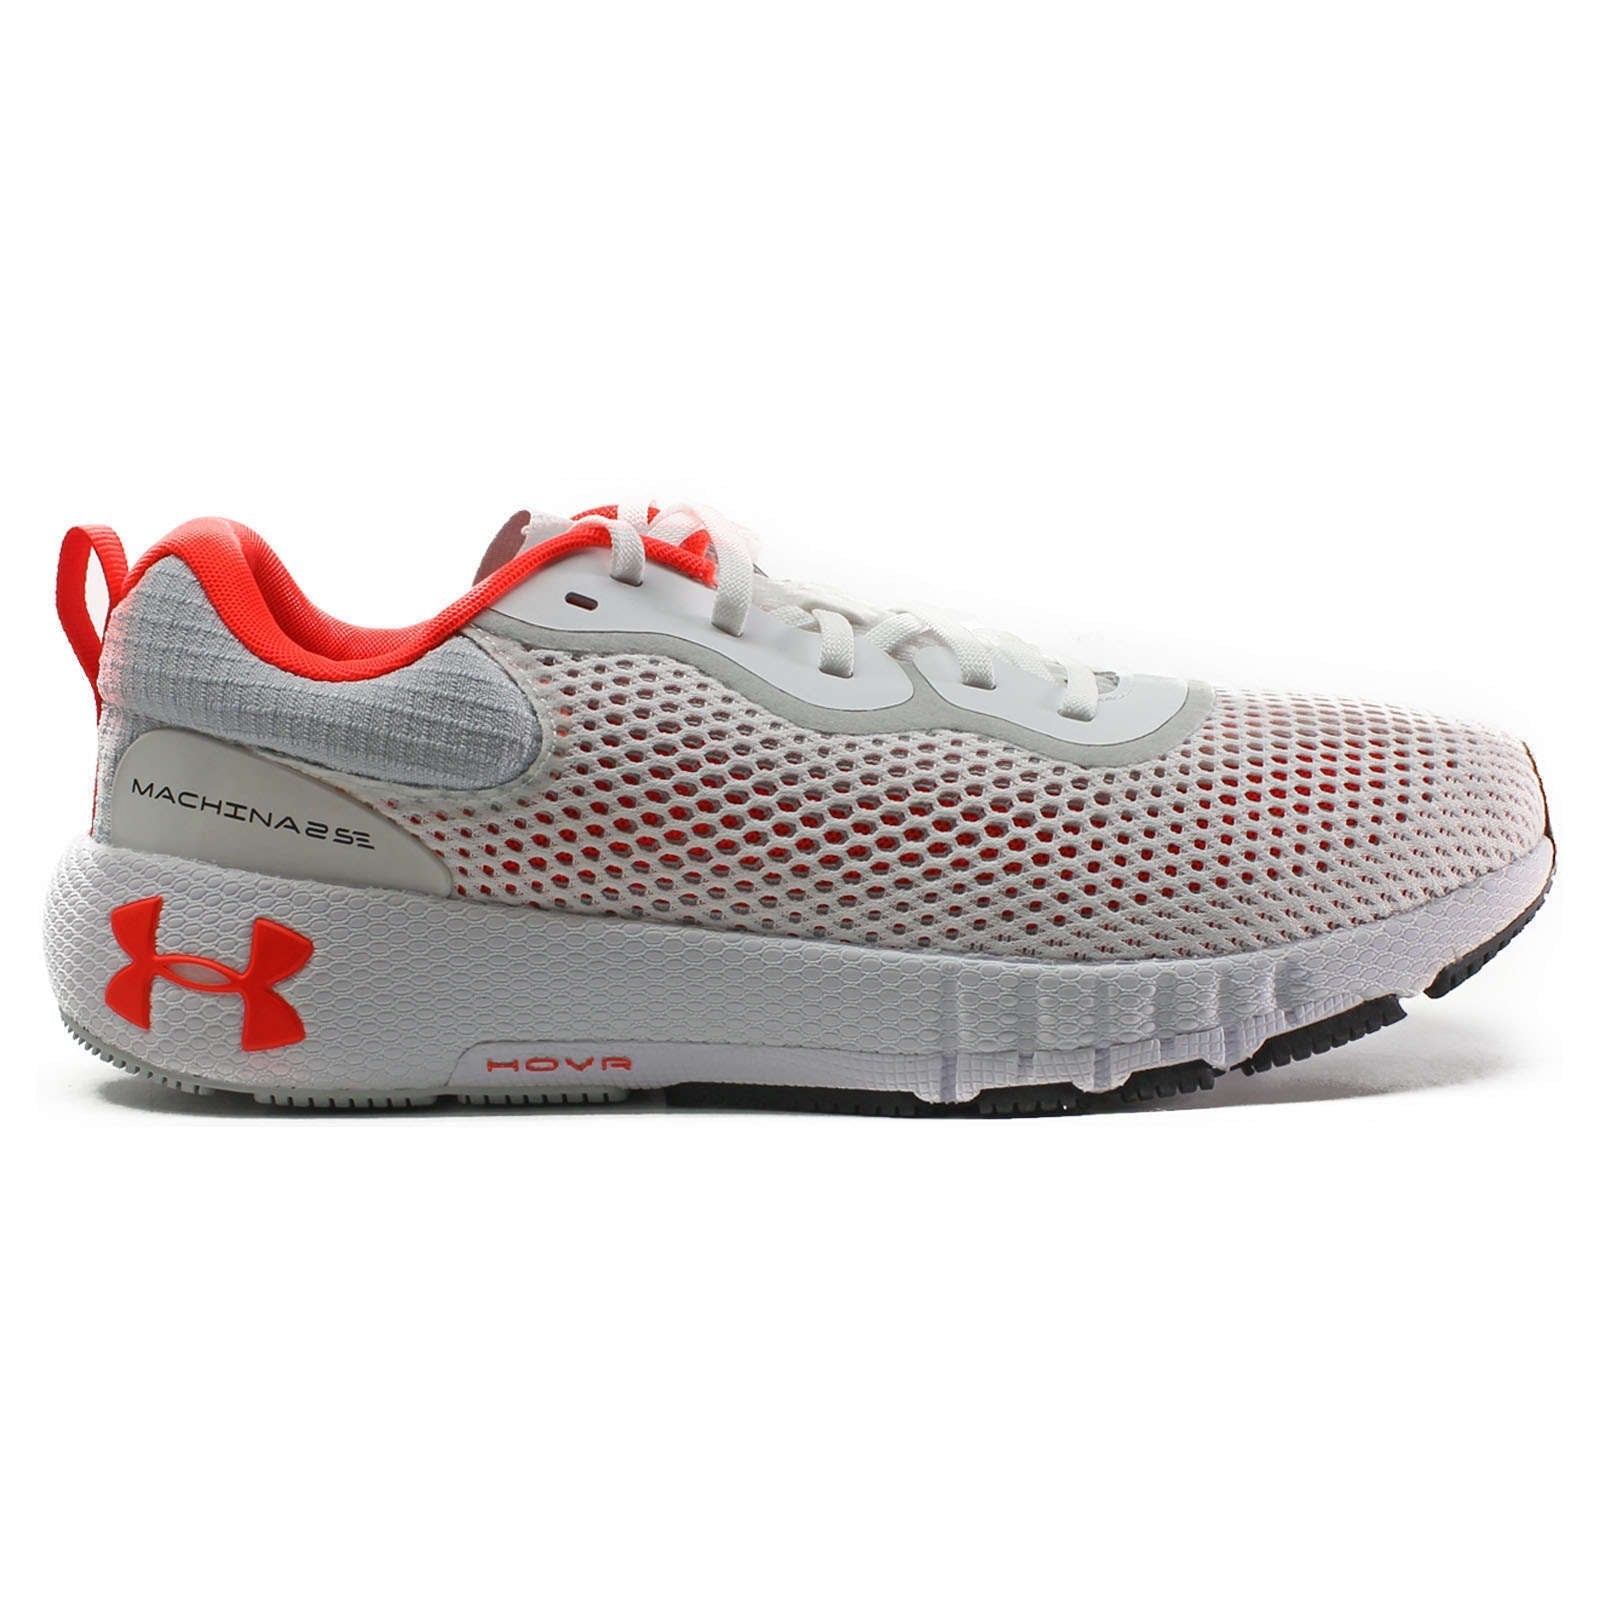 Under Armour HOVR Machina 2 Se Synthetic Textile Men's Low-Top Sneakers#color_white grey